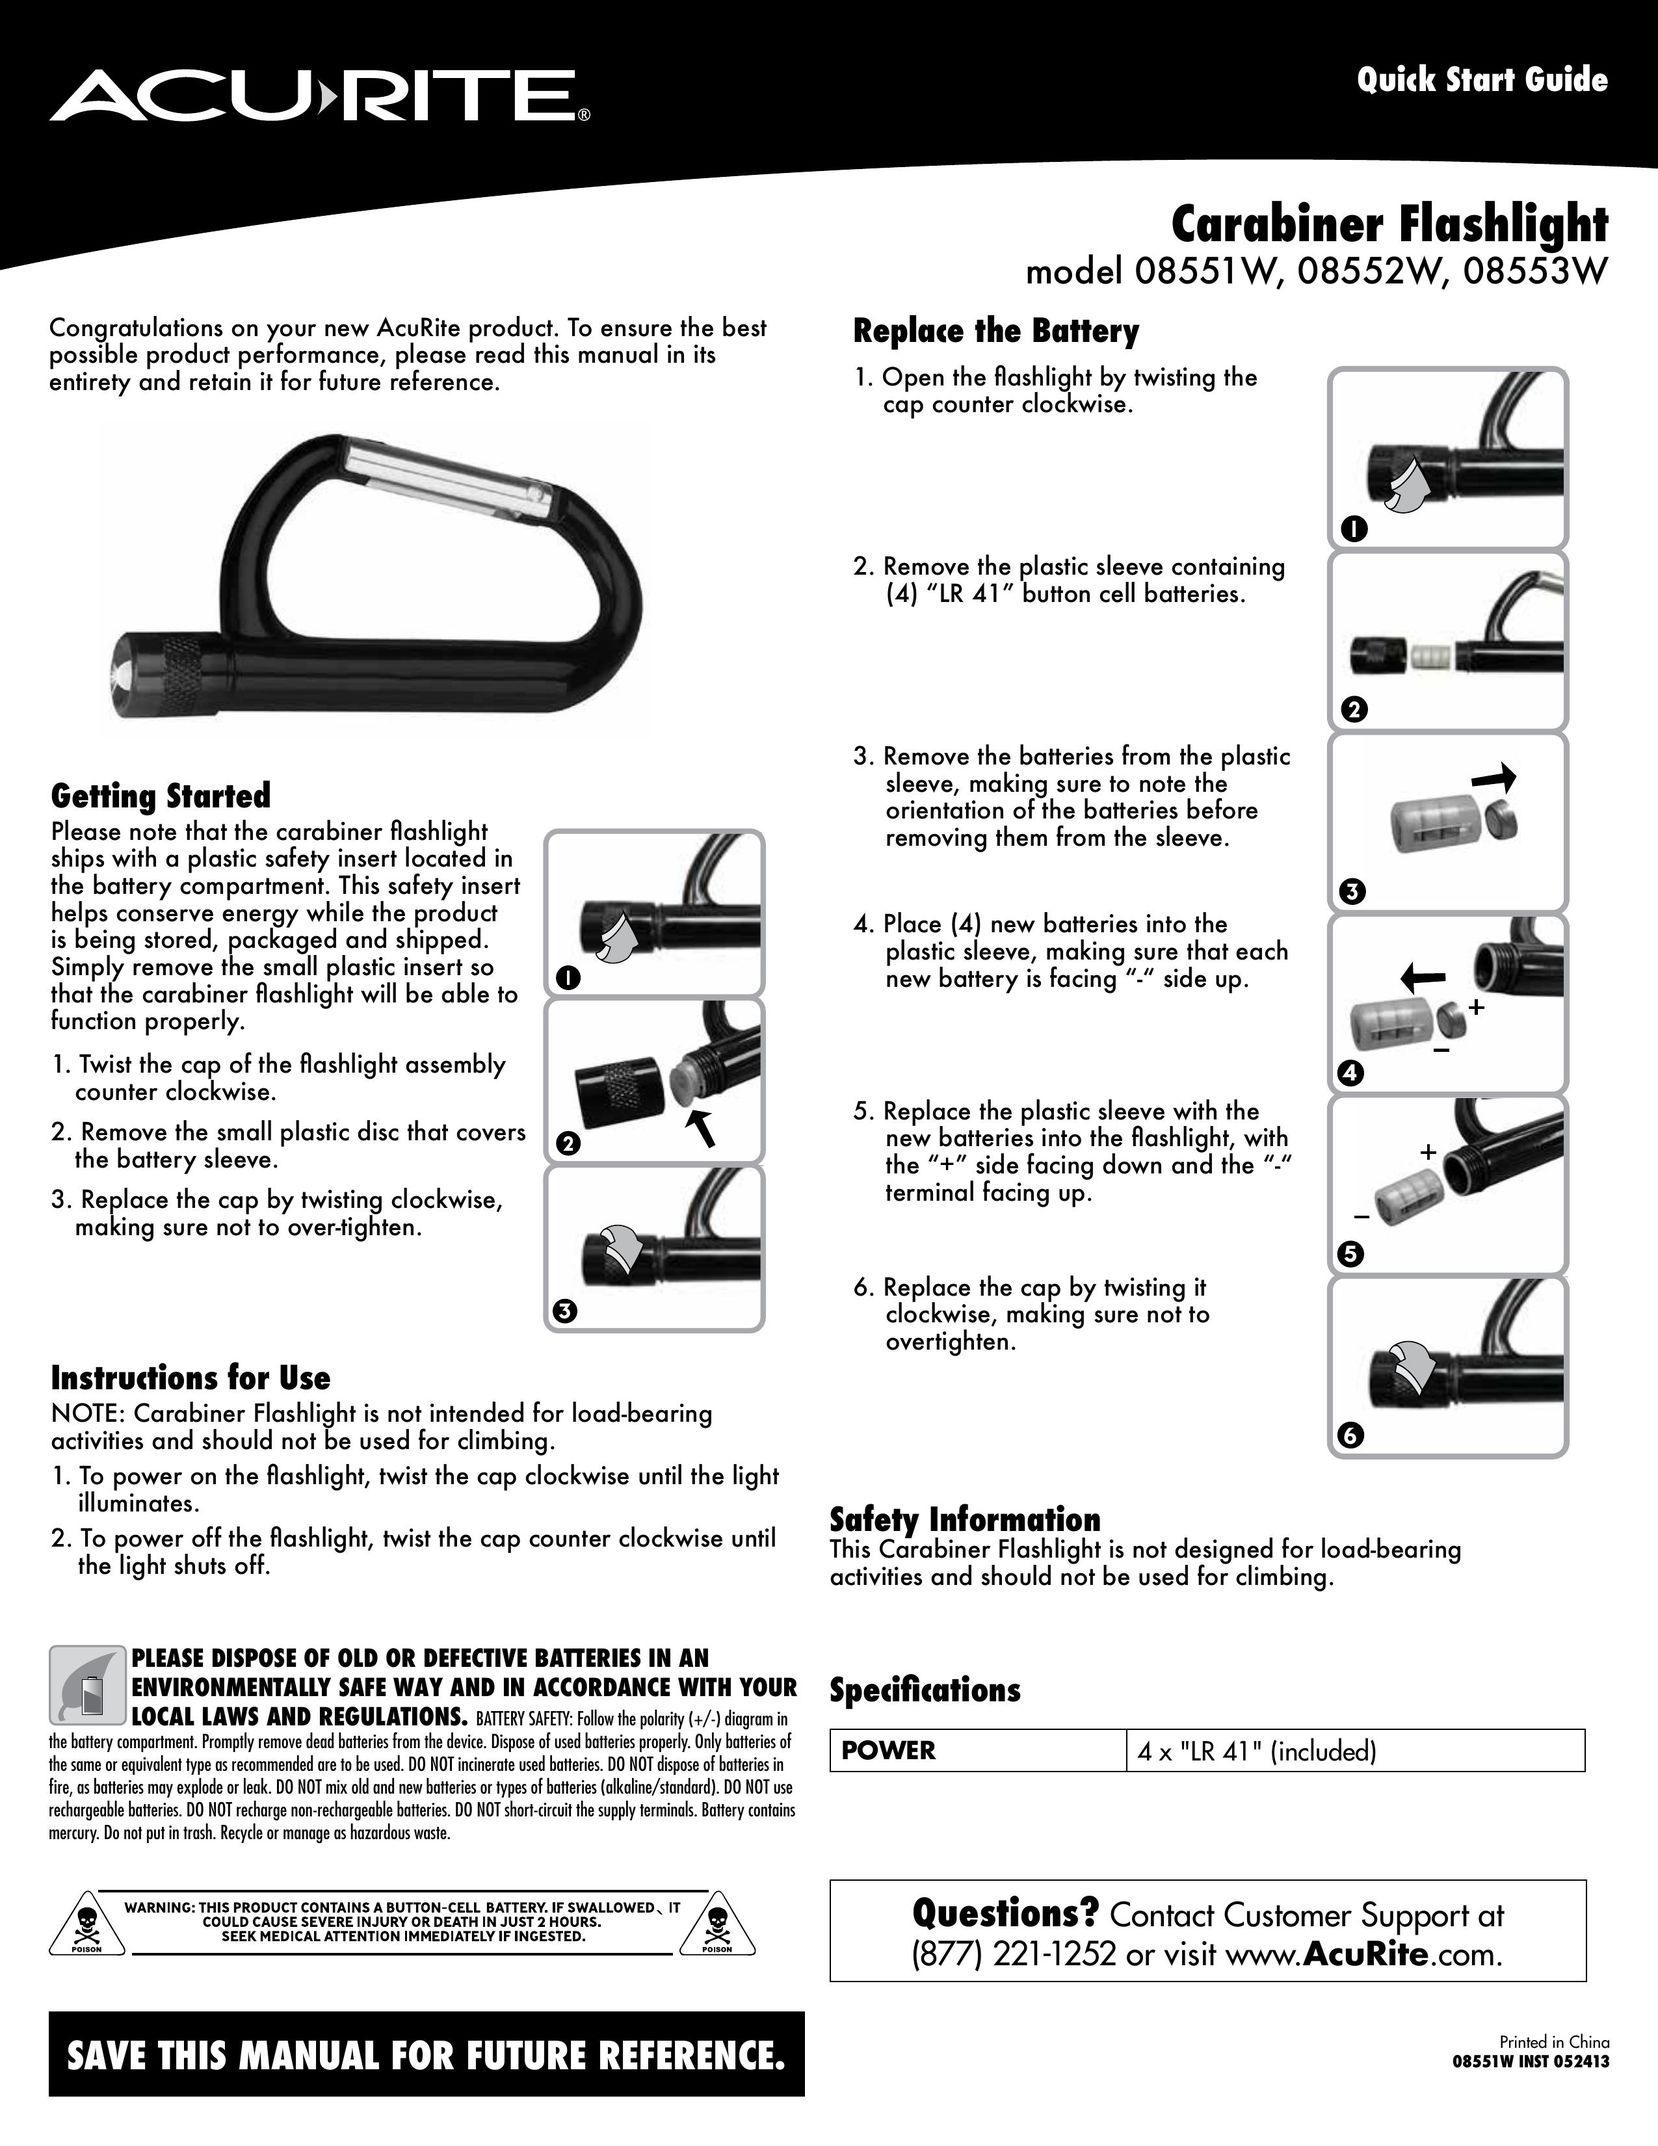 Acu-Rite 08553W Home Safety Product User Manual